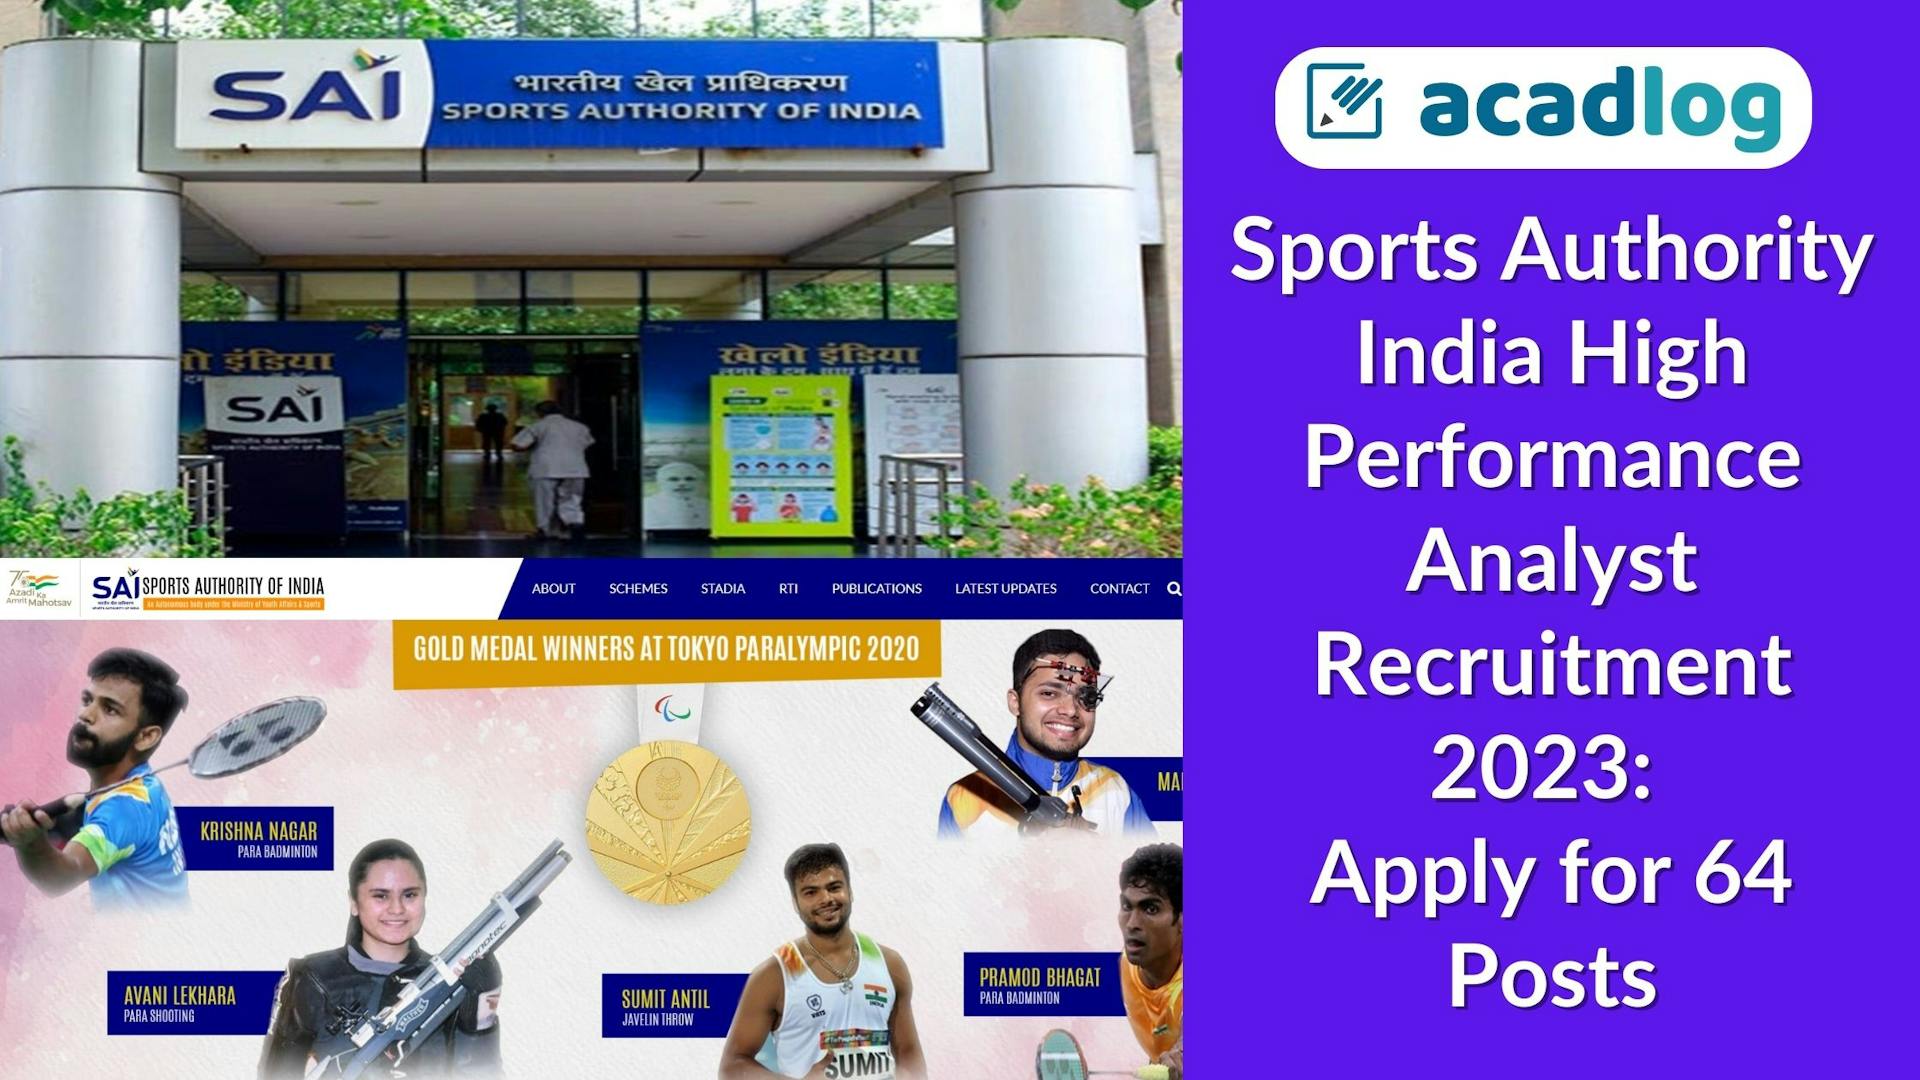 Sports Authority India High Performance Analyst Recruitment 2023: Apply for 64 Posts